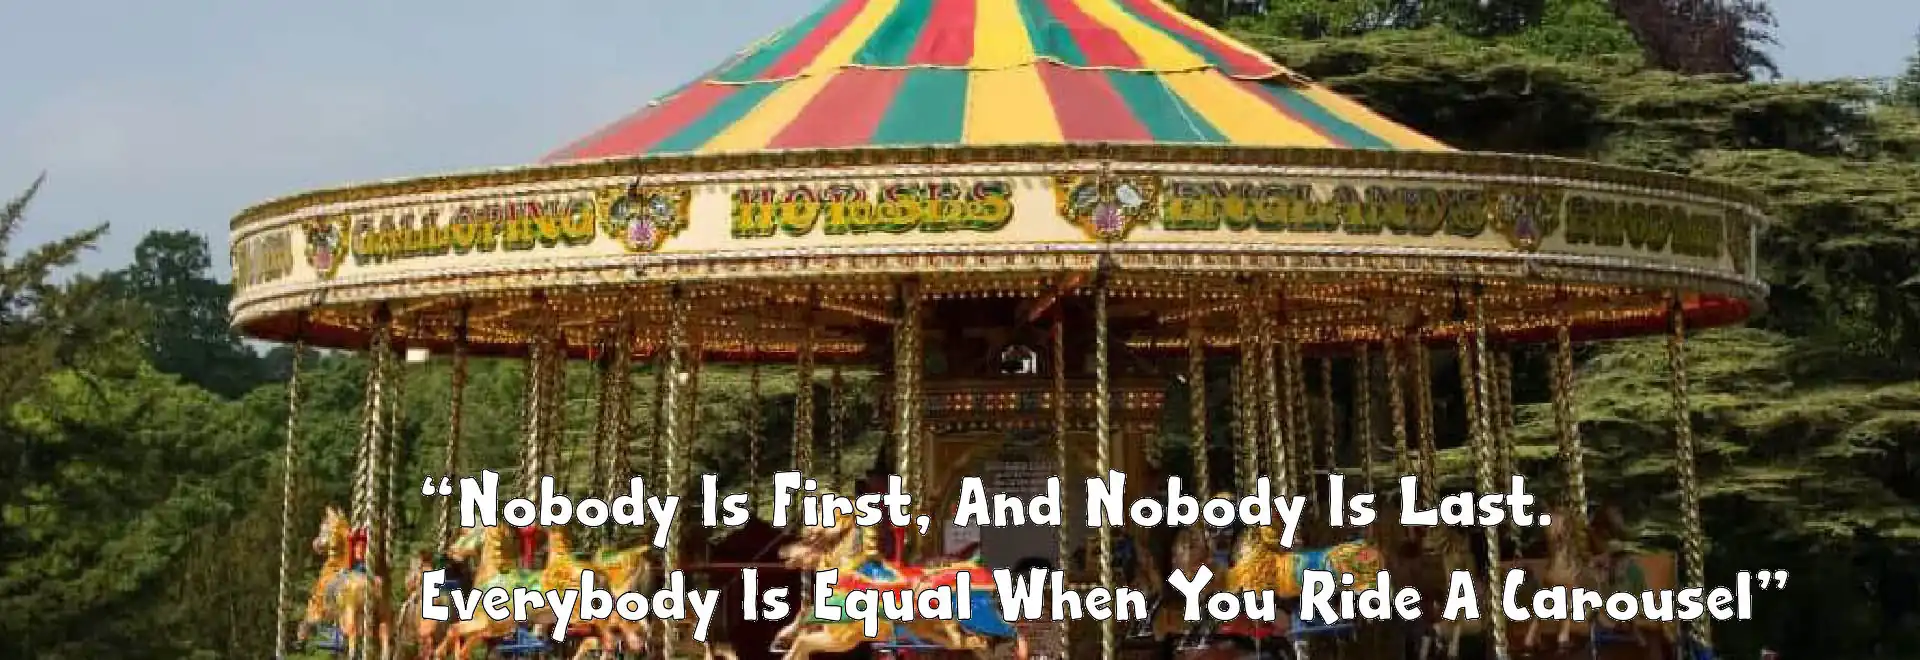 Victorian Carousel Hire Weddings Parties Events